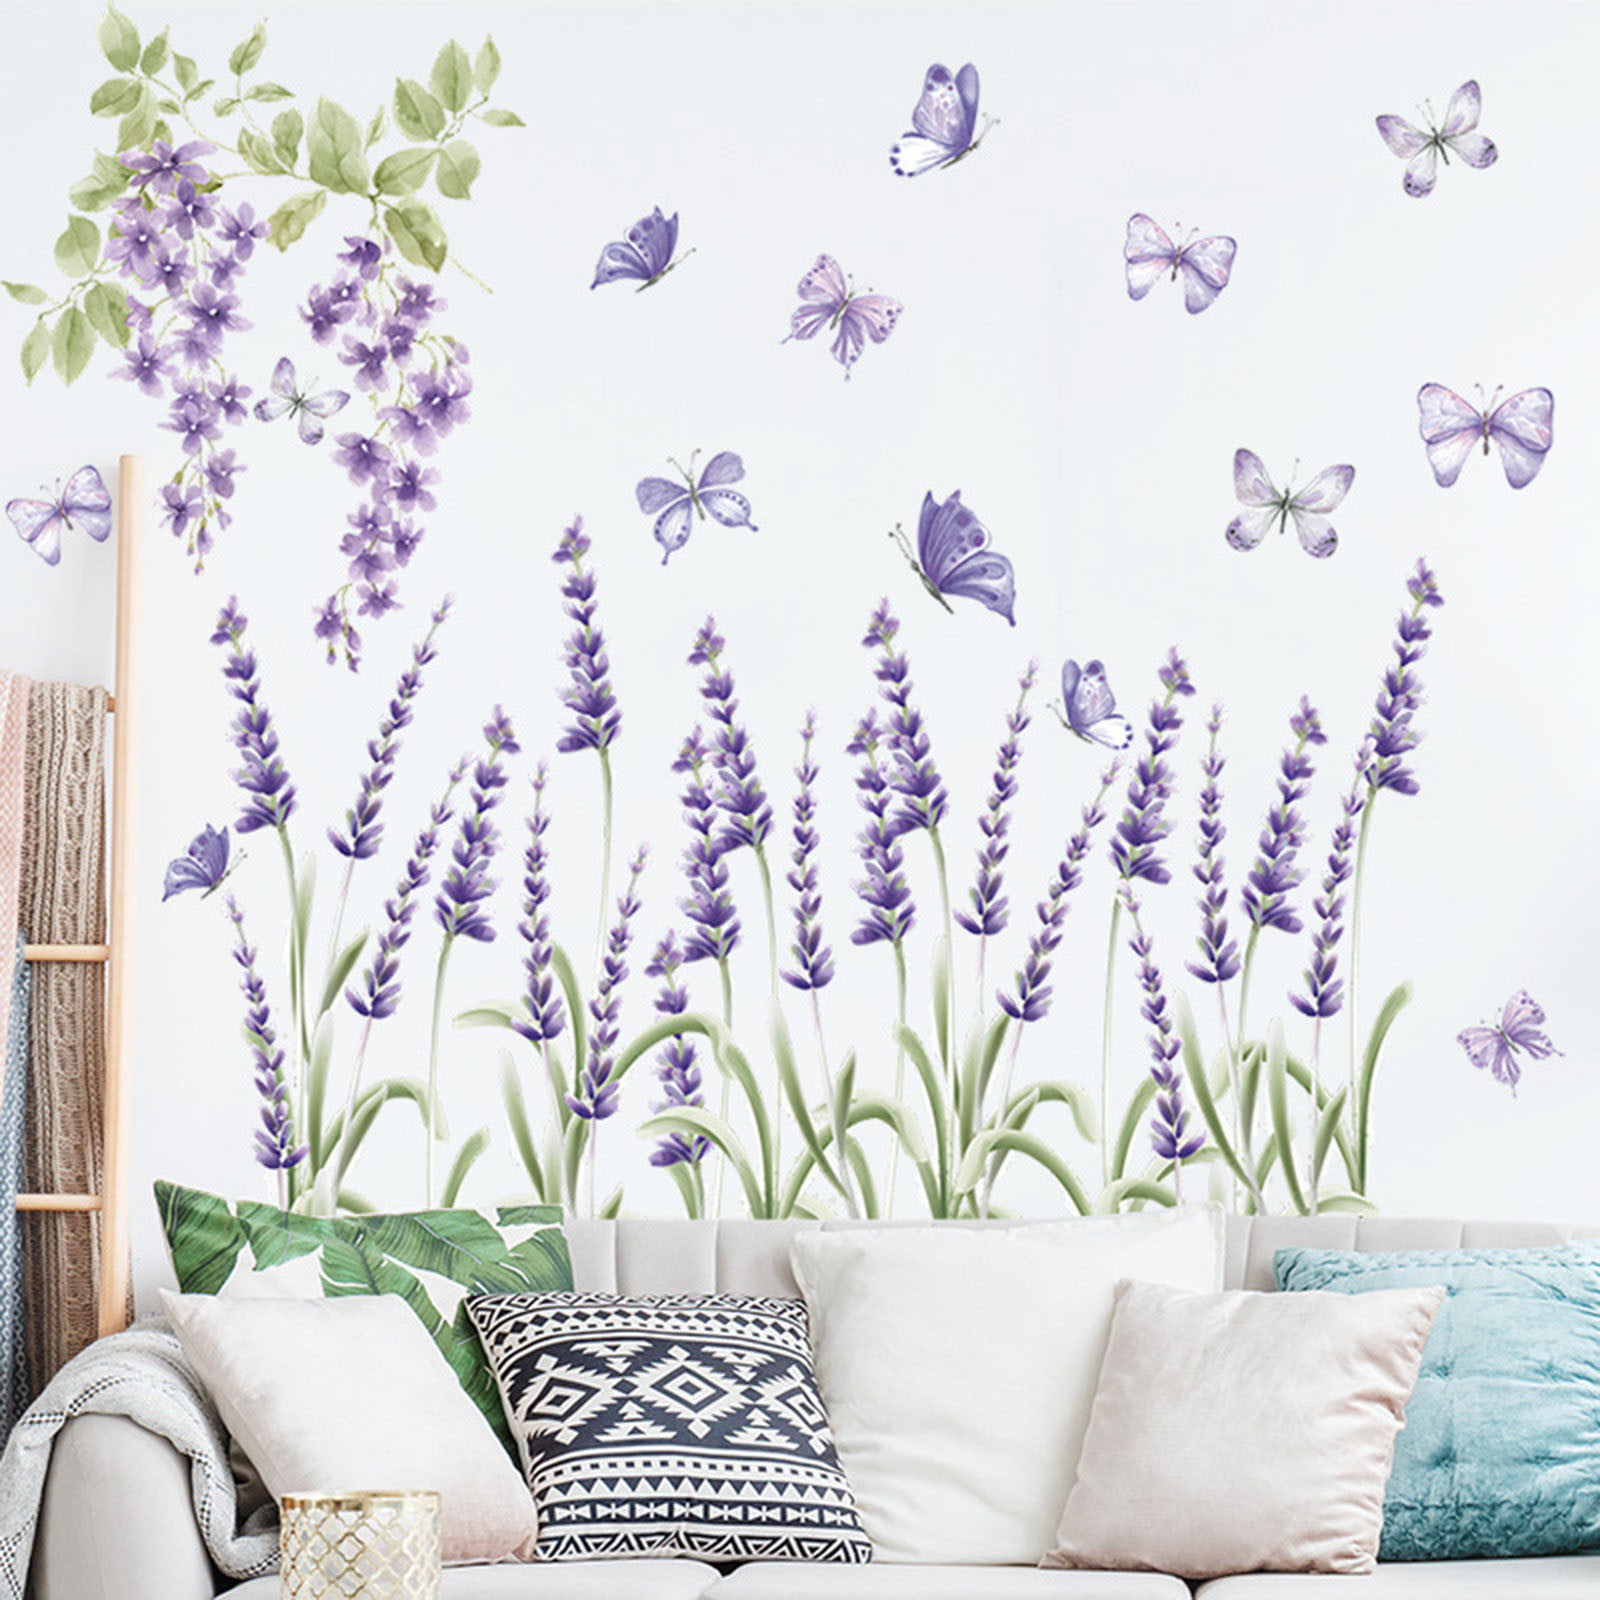 Flowers lavender Home Bedroom Decor Removable Wall Stickers Decal Decoration 